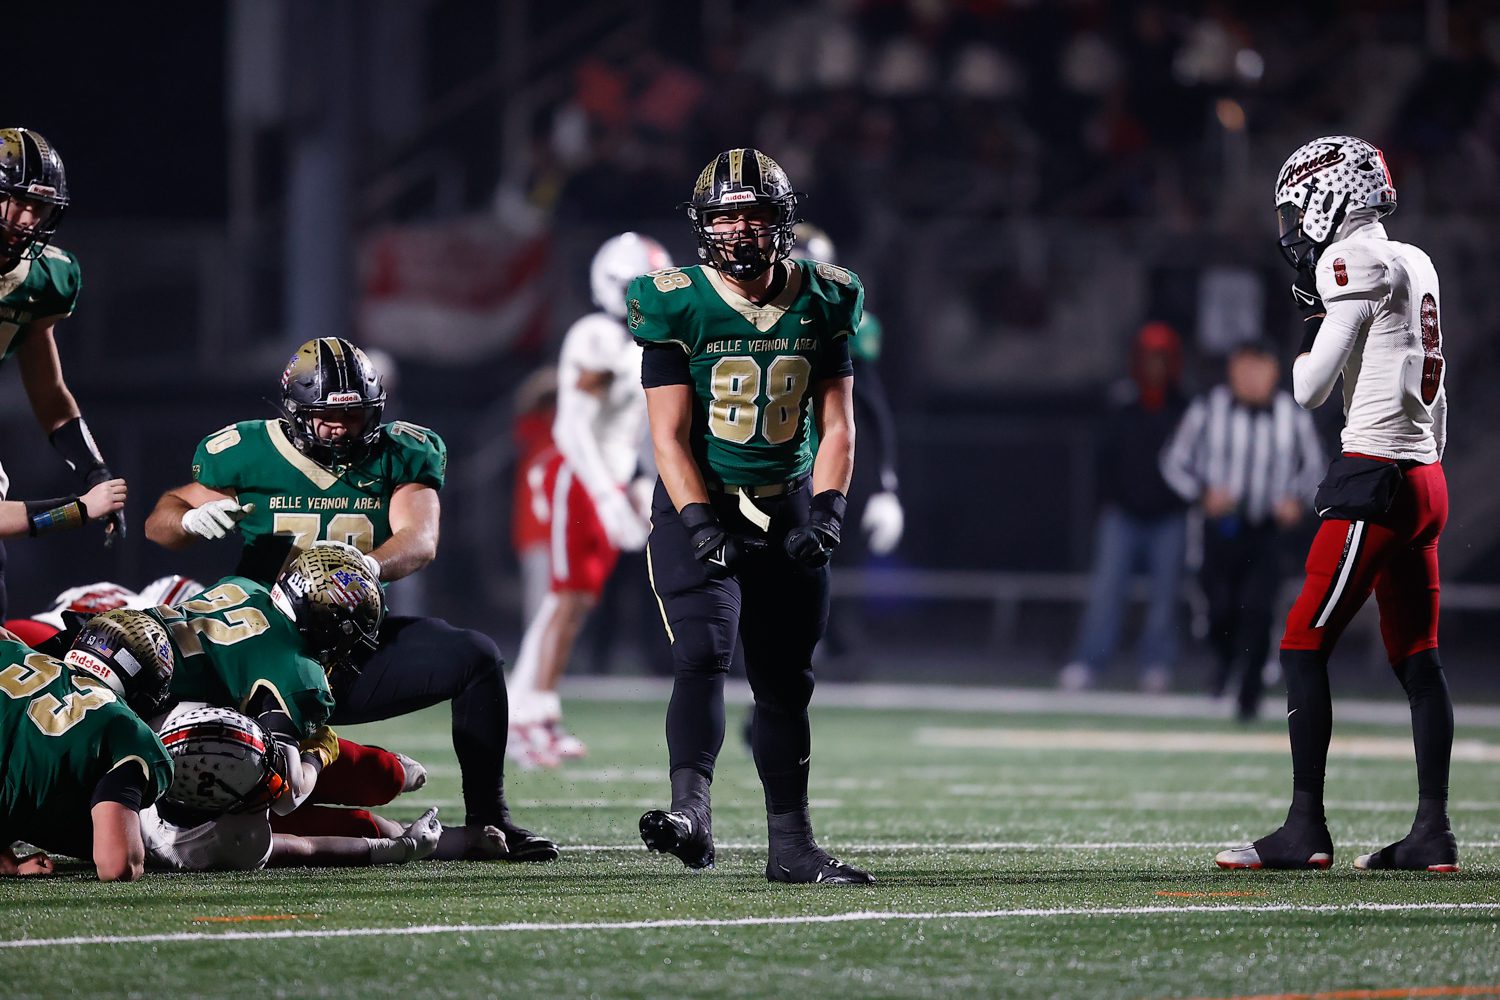 Belle Vernon Blows Out Hickory, Advances to State Final